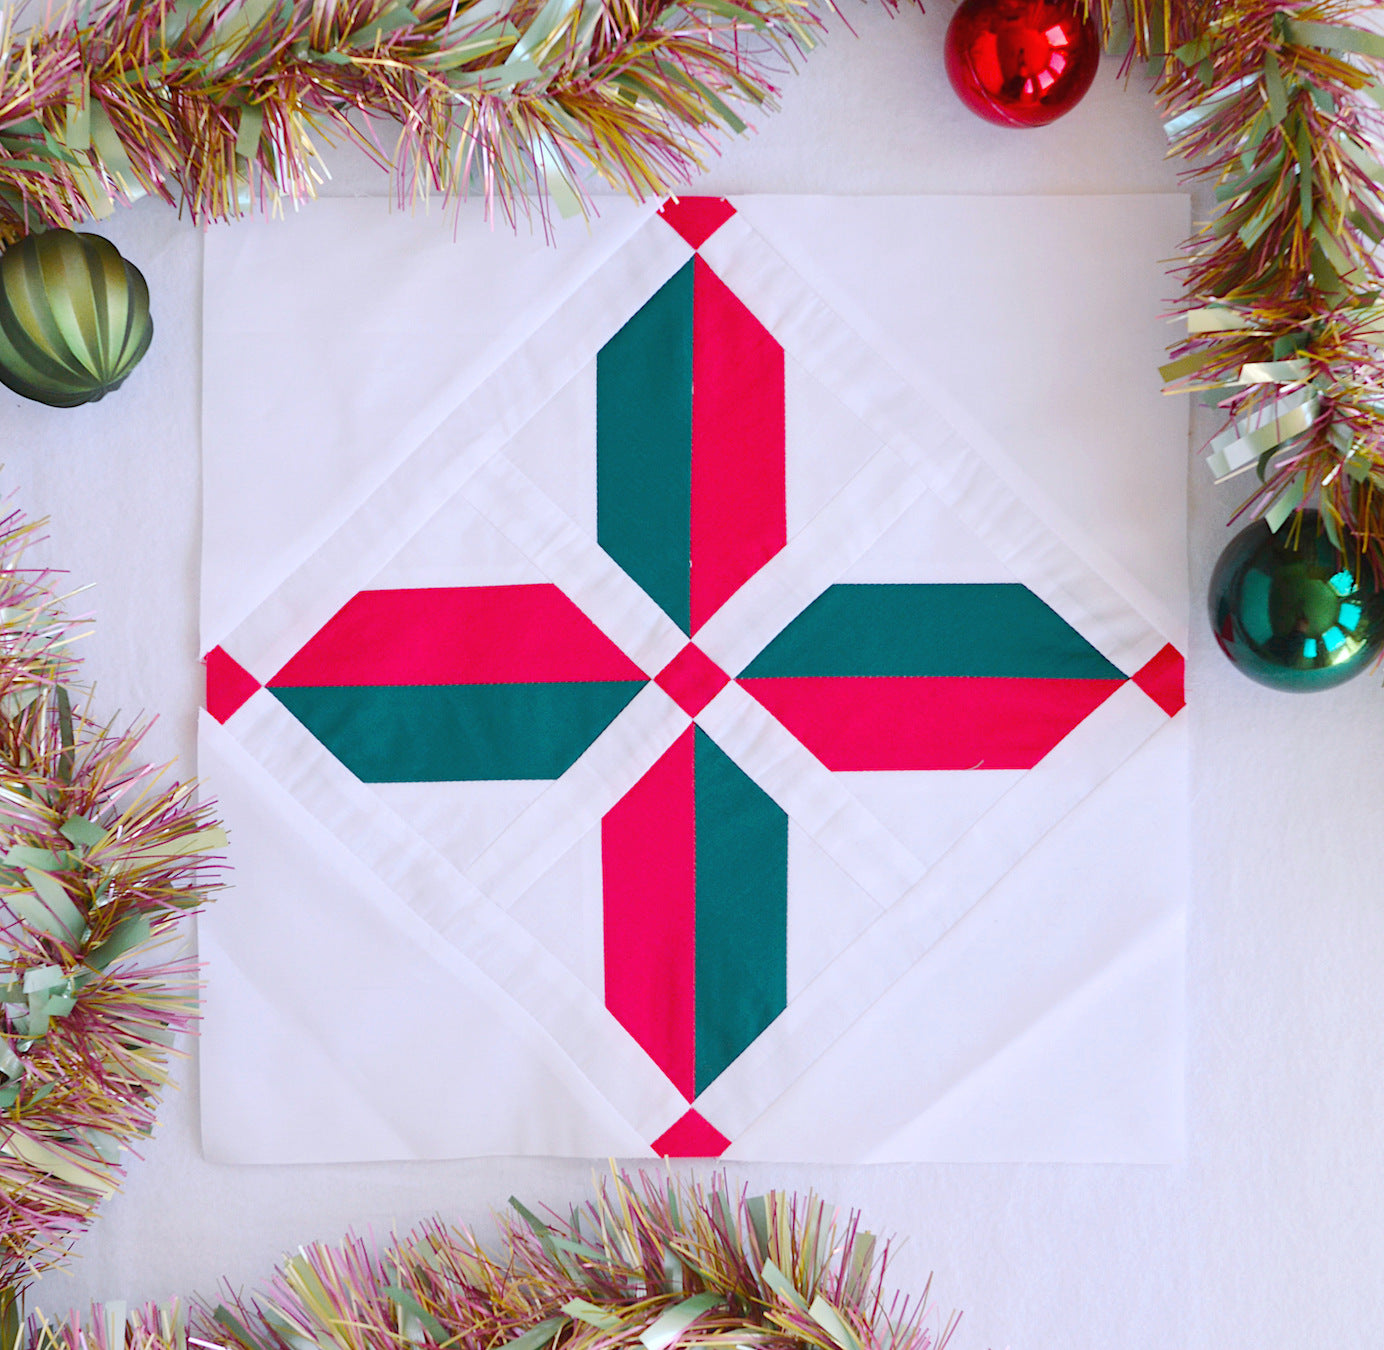 Shown here is a star quilt block in red and green colours surrounded by red and green baubles and tinsel